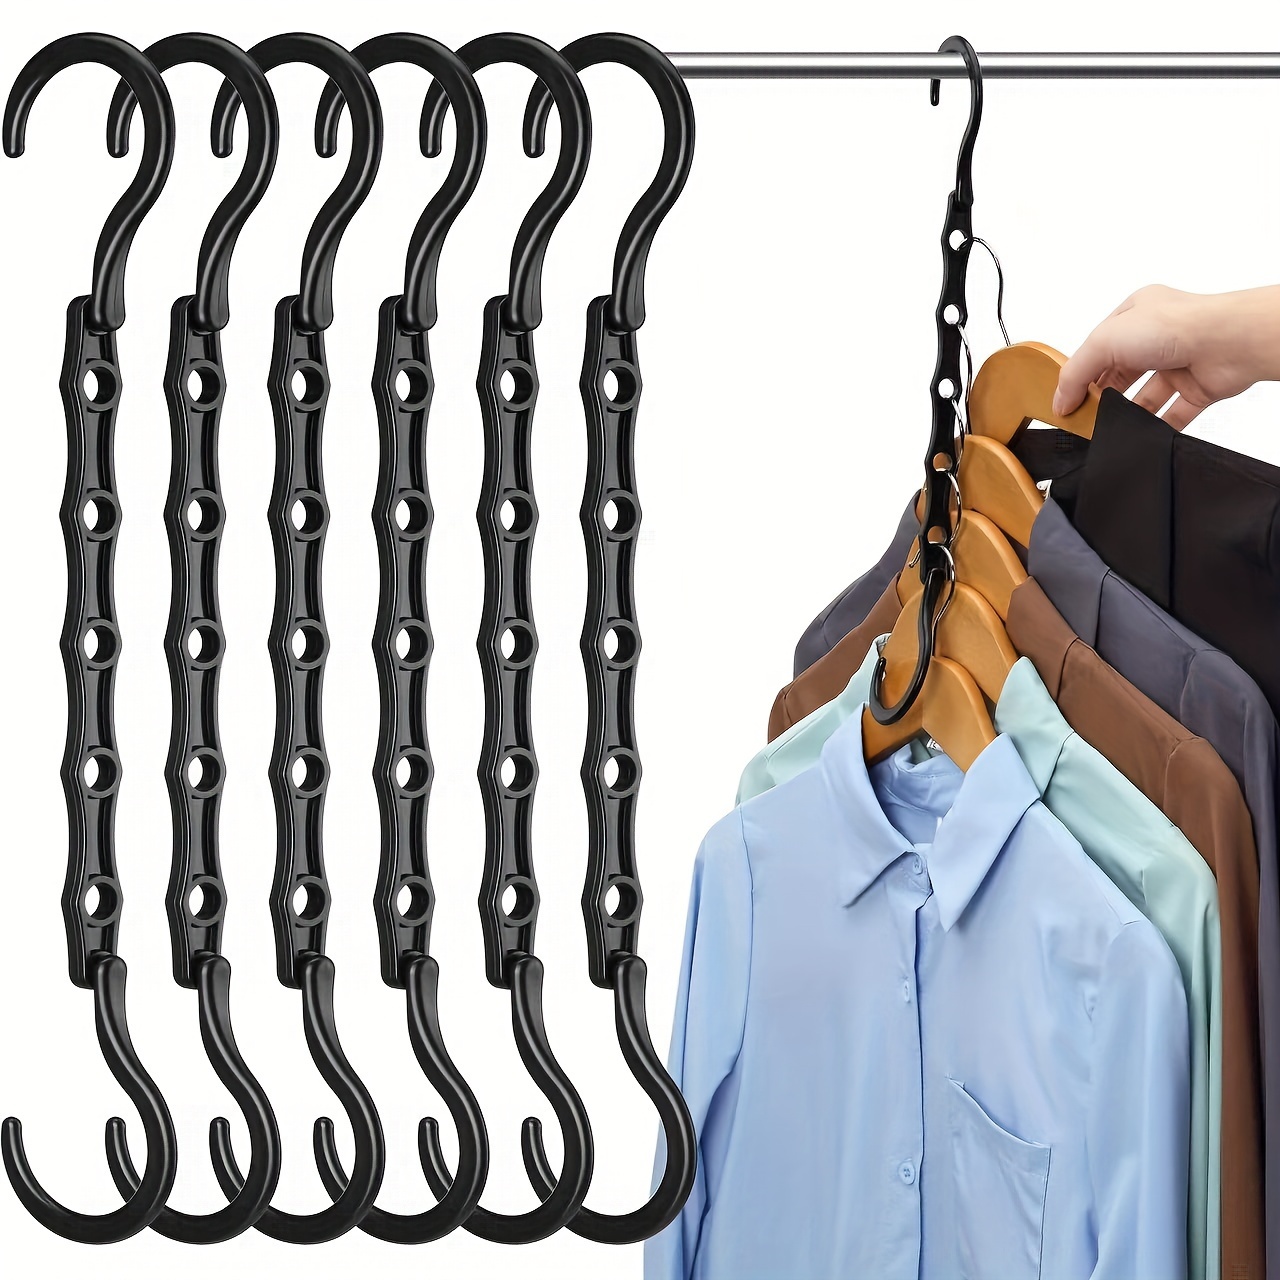 12pcs Clothes Hangers Space Saving Closet Organizers And Storage